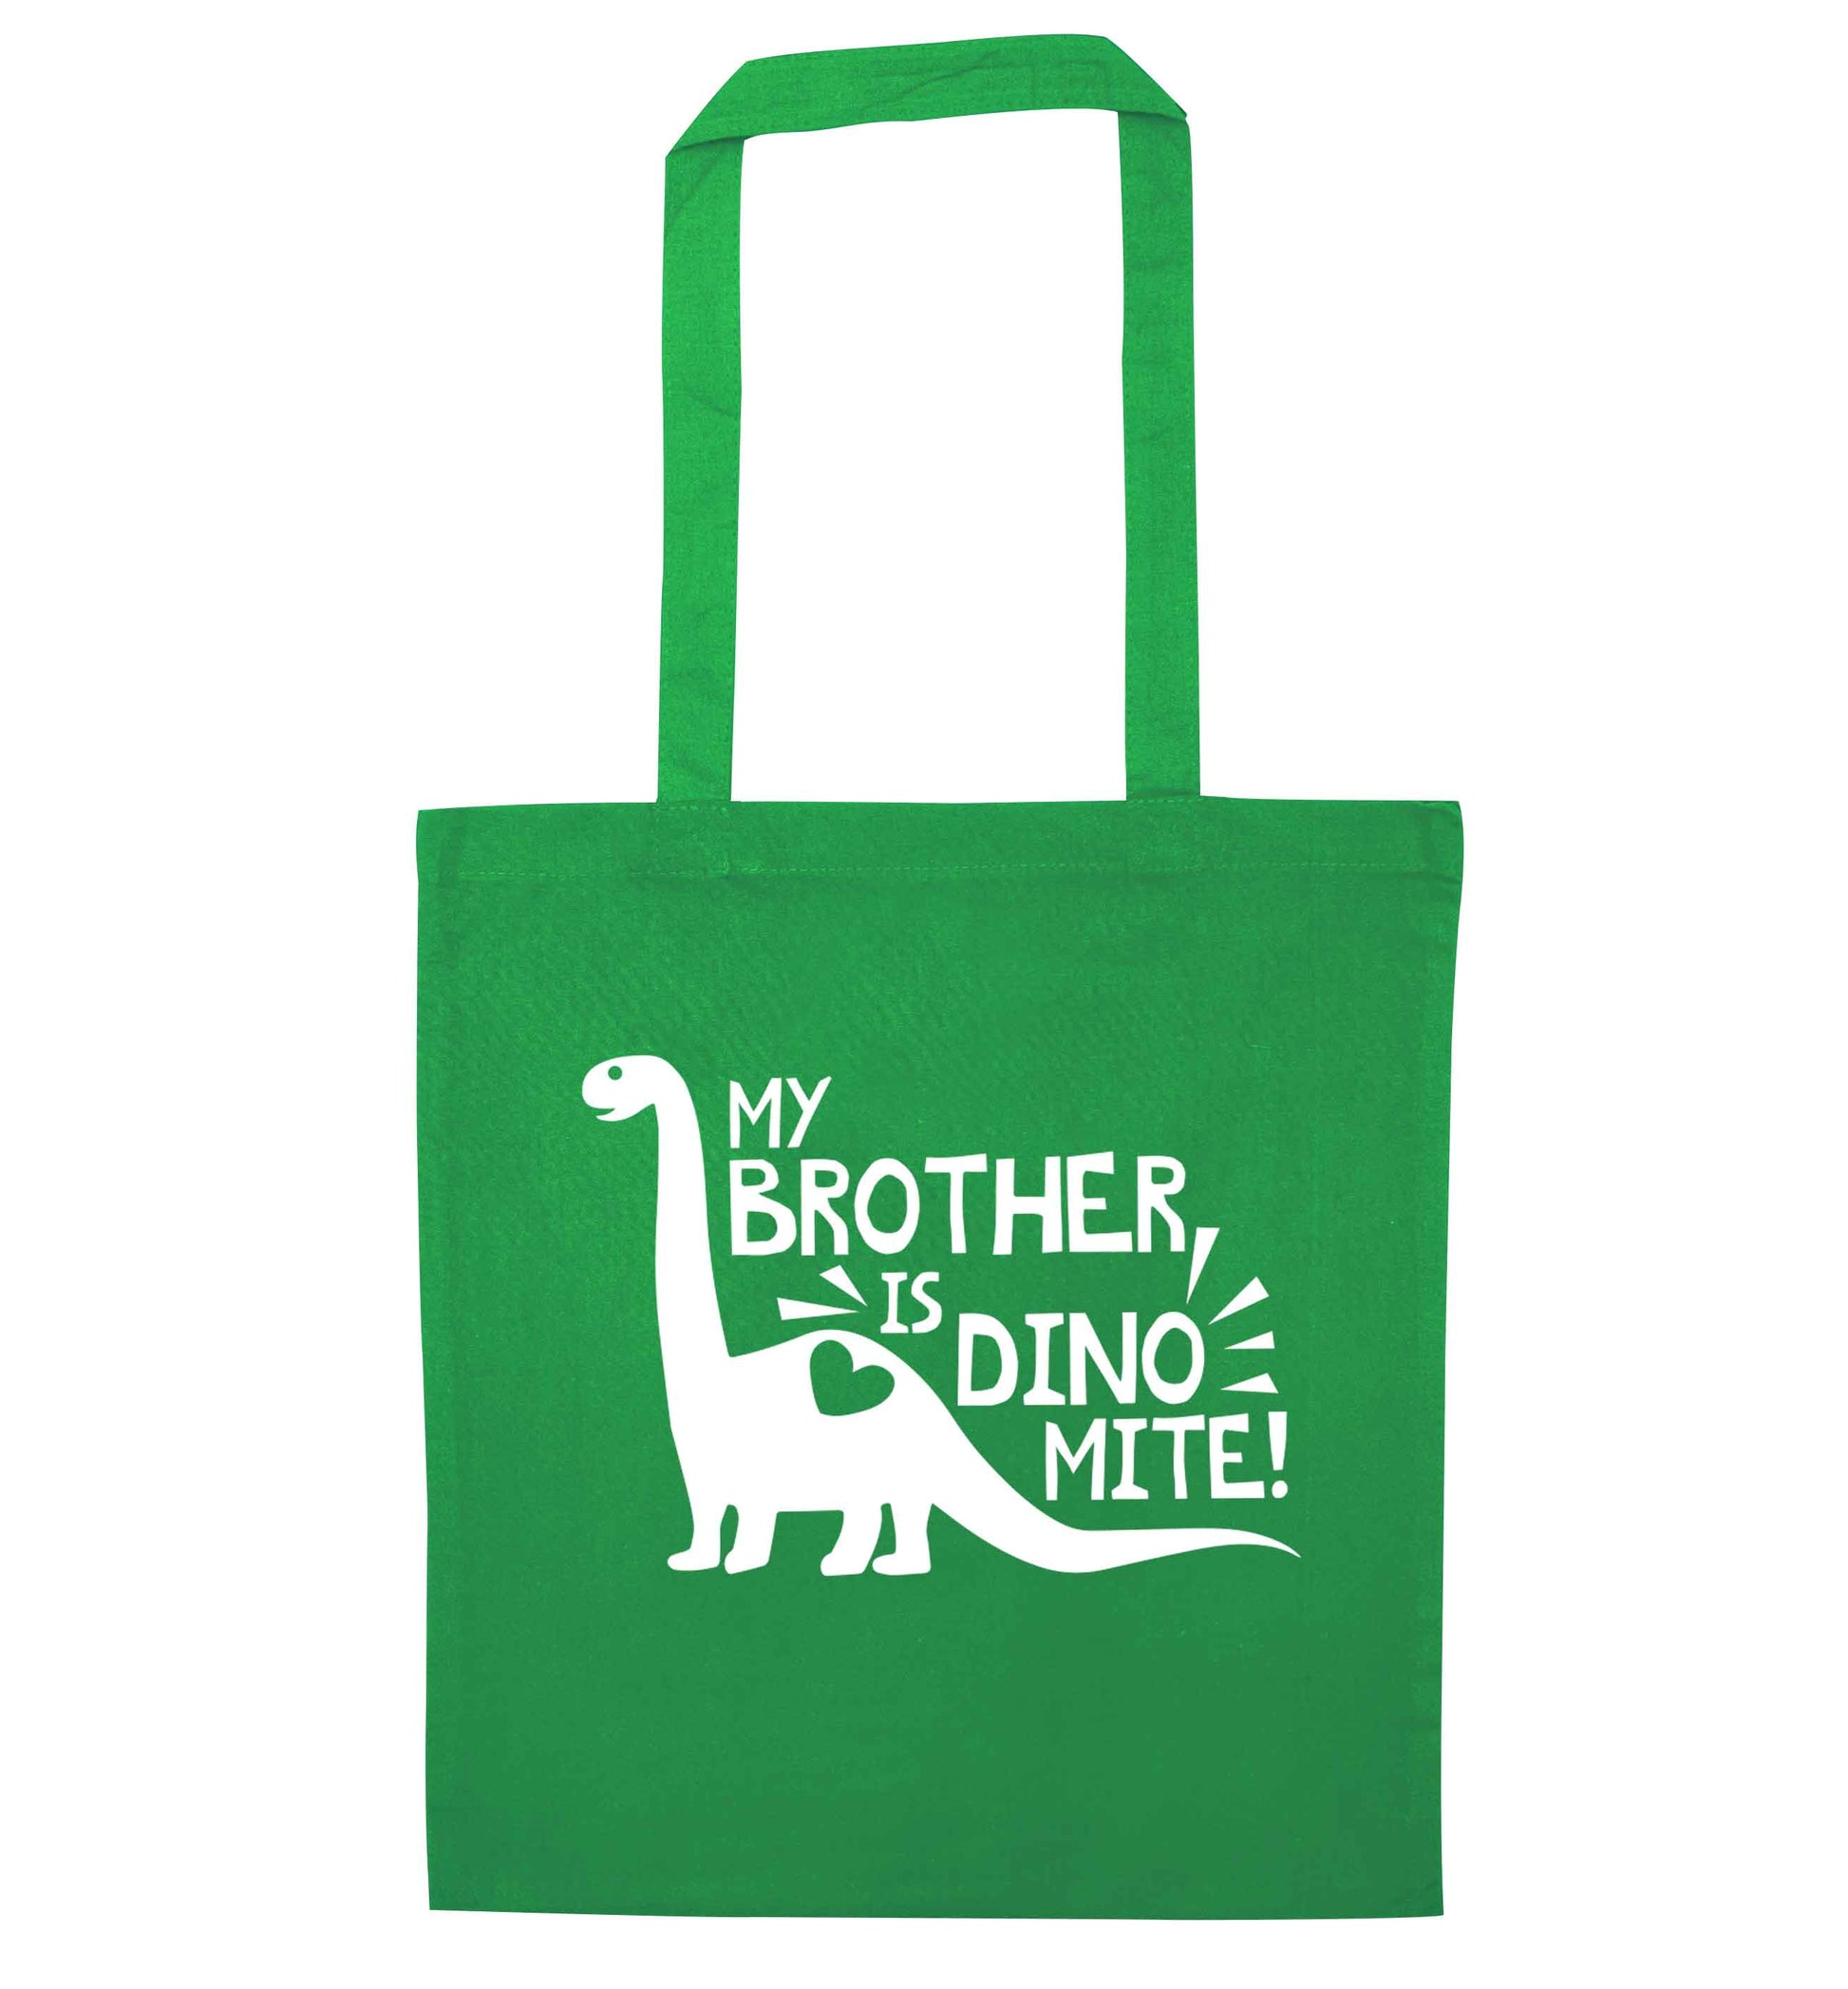 My brother is dinomite! green tote bag